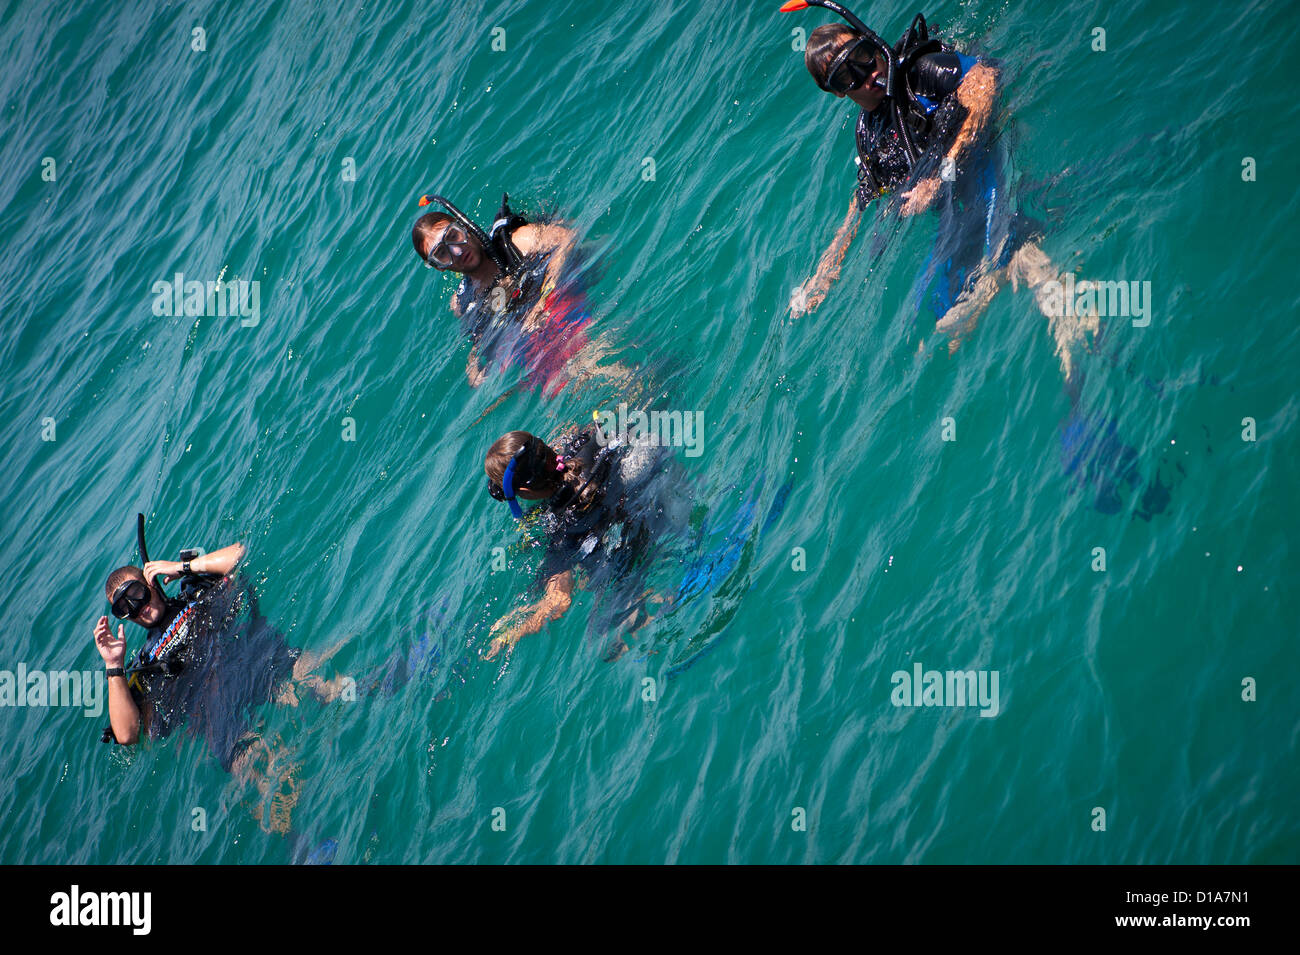 SCUBA divers entering the water before a dive, Pattaya, Thailand Stock Photo